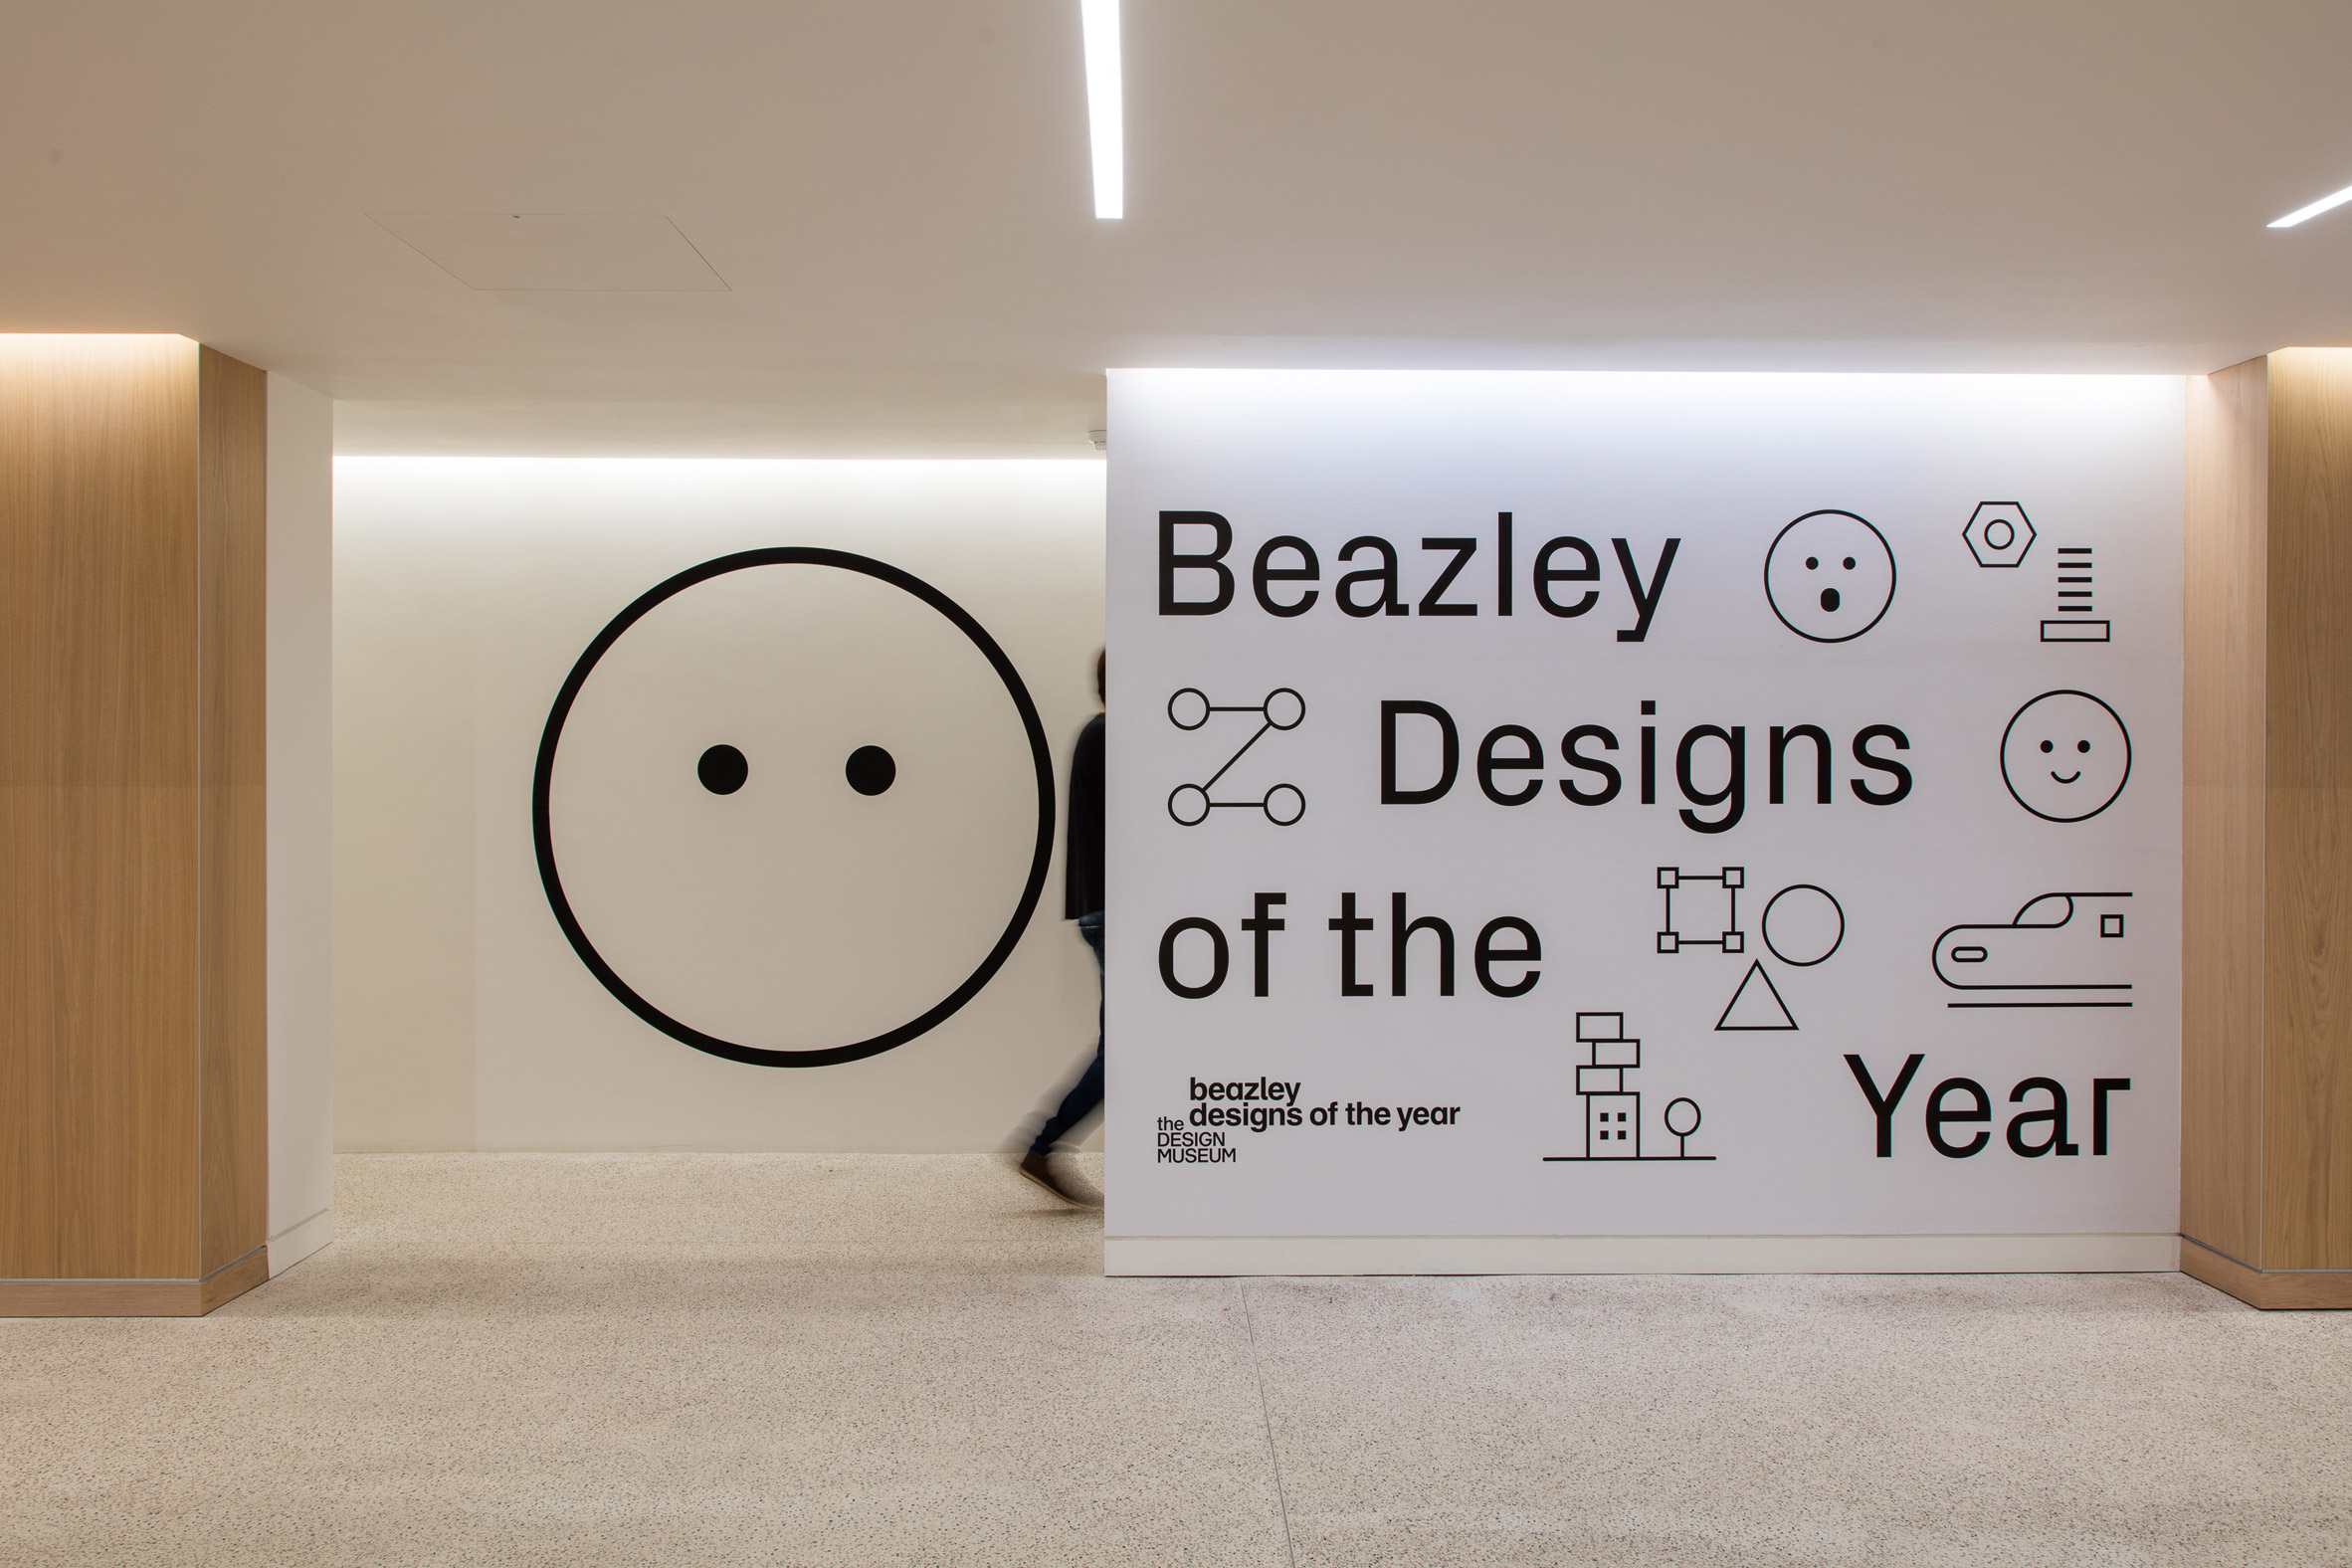 Interview: Designs of the Year